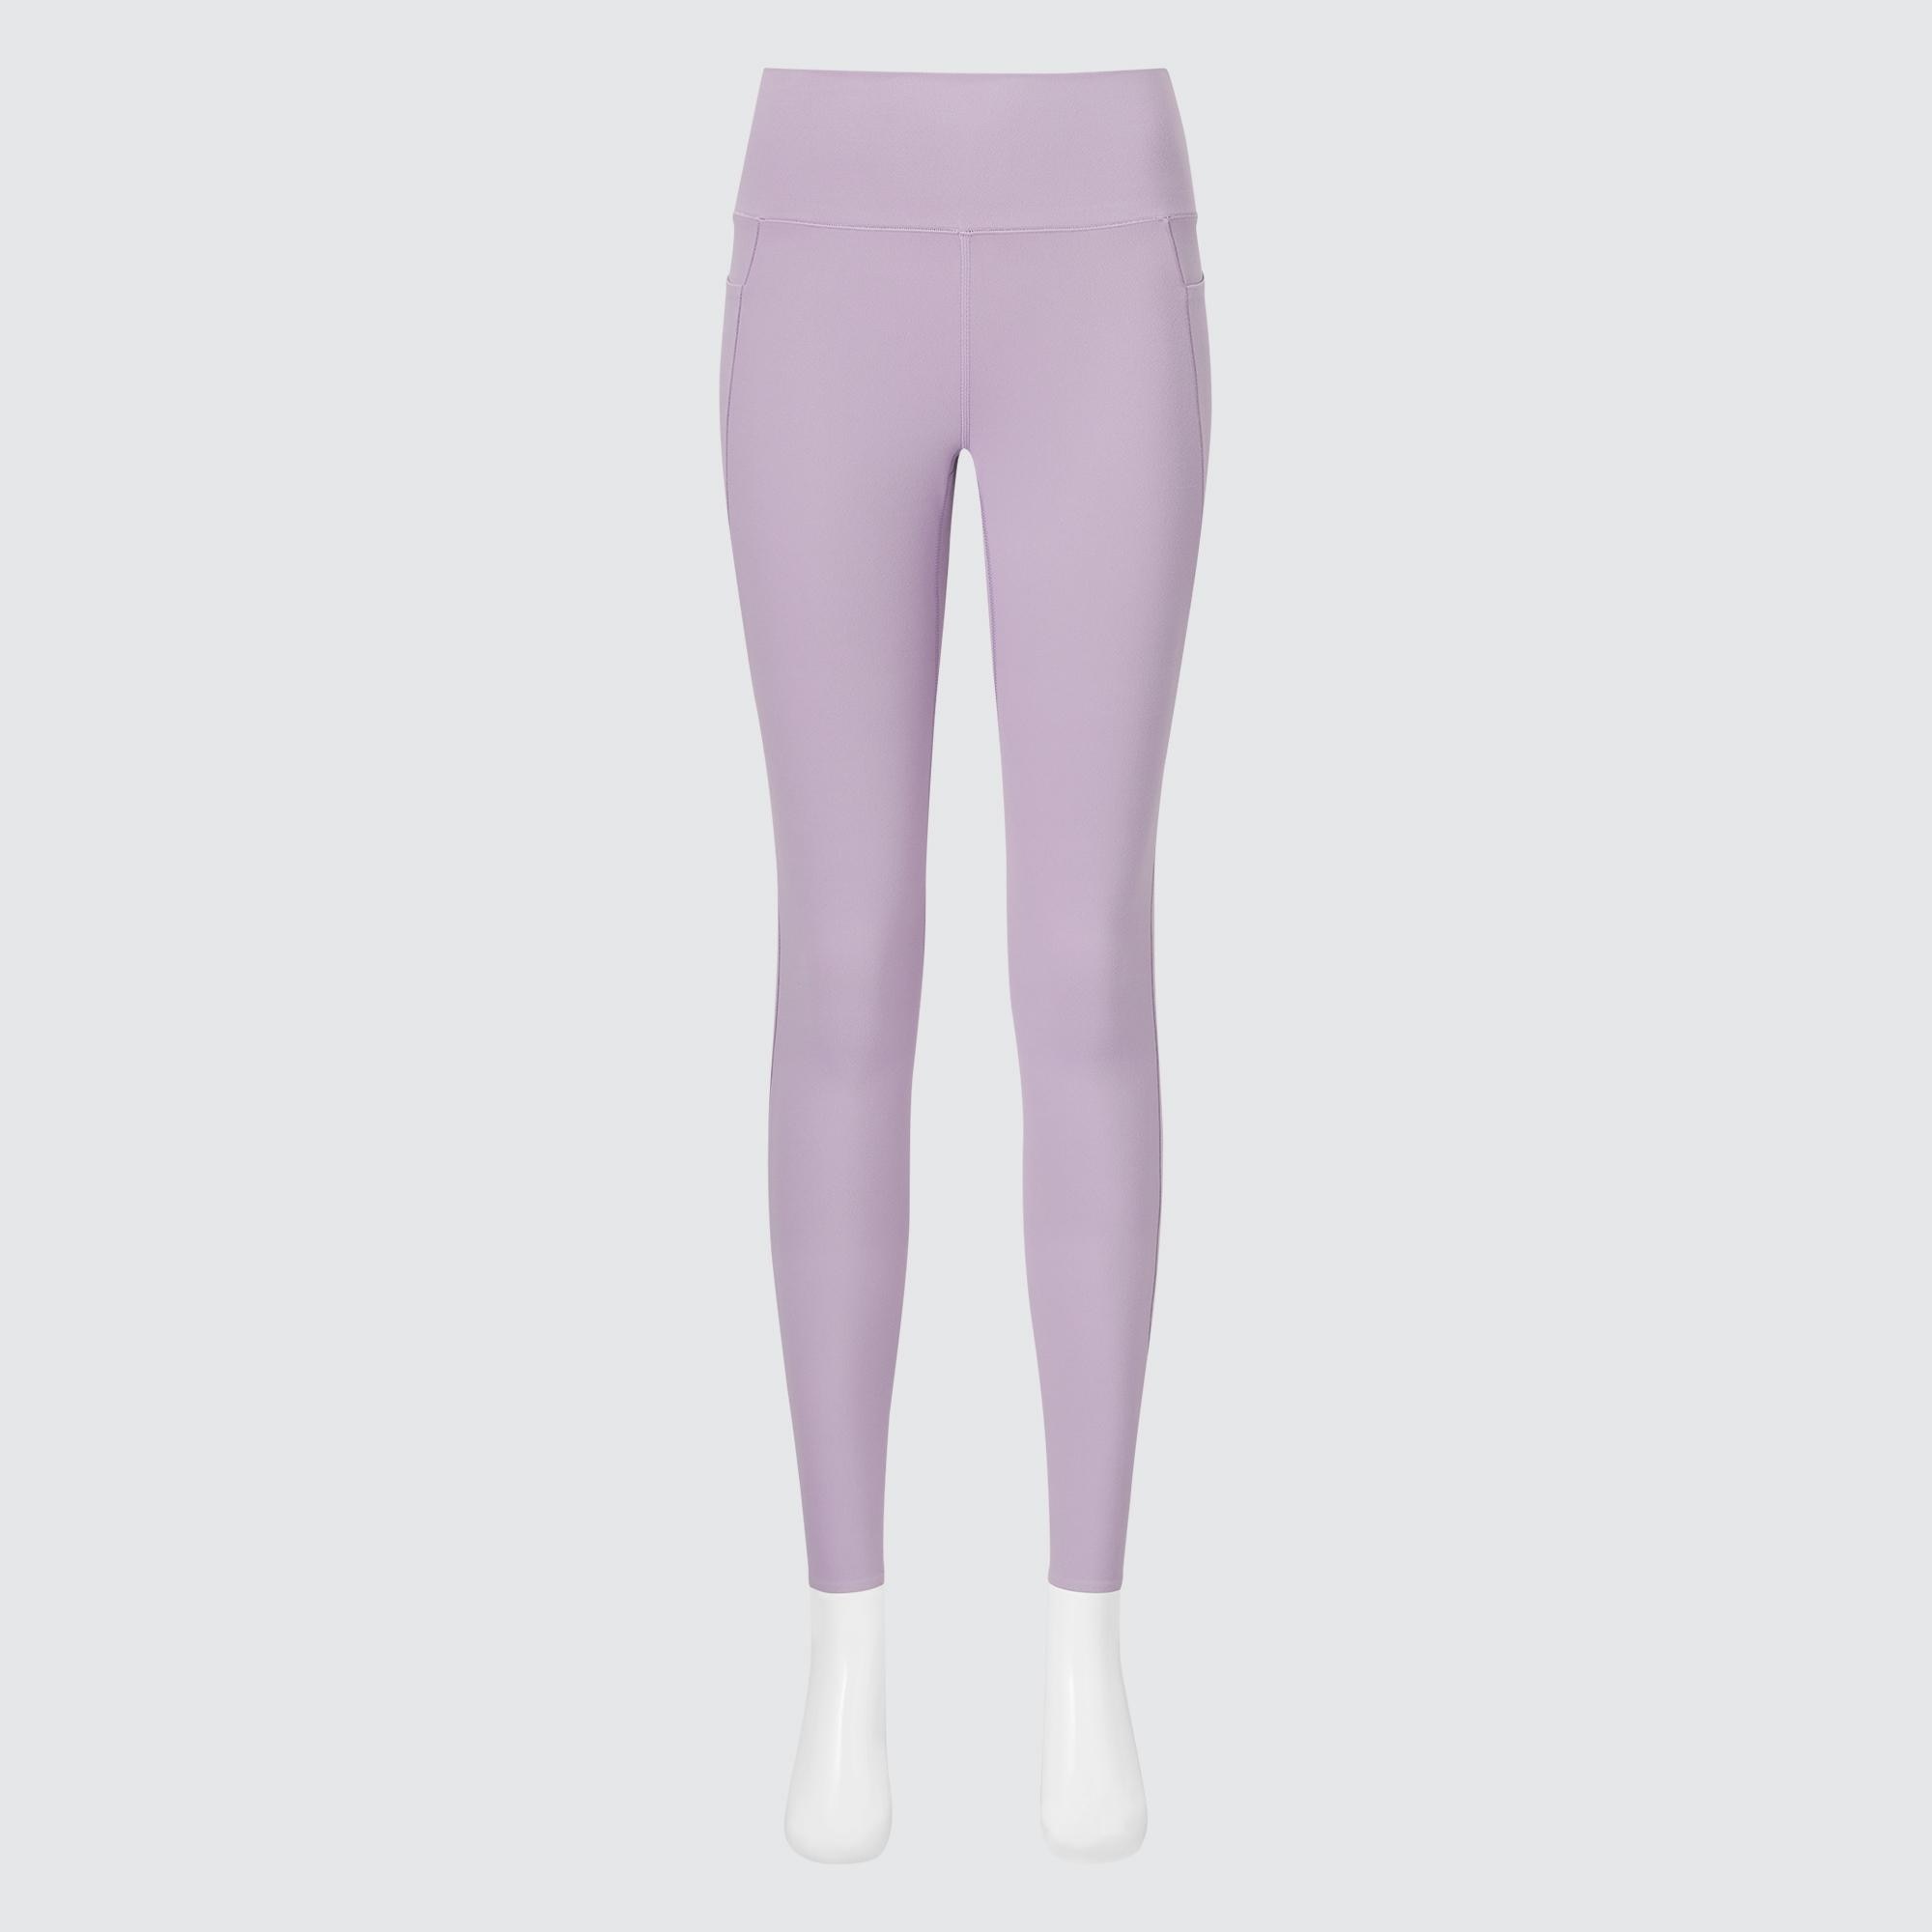 Uniqlo UV Soft Legging Tights in Teal, Women's Fashion, Activewear on  Carousell